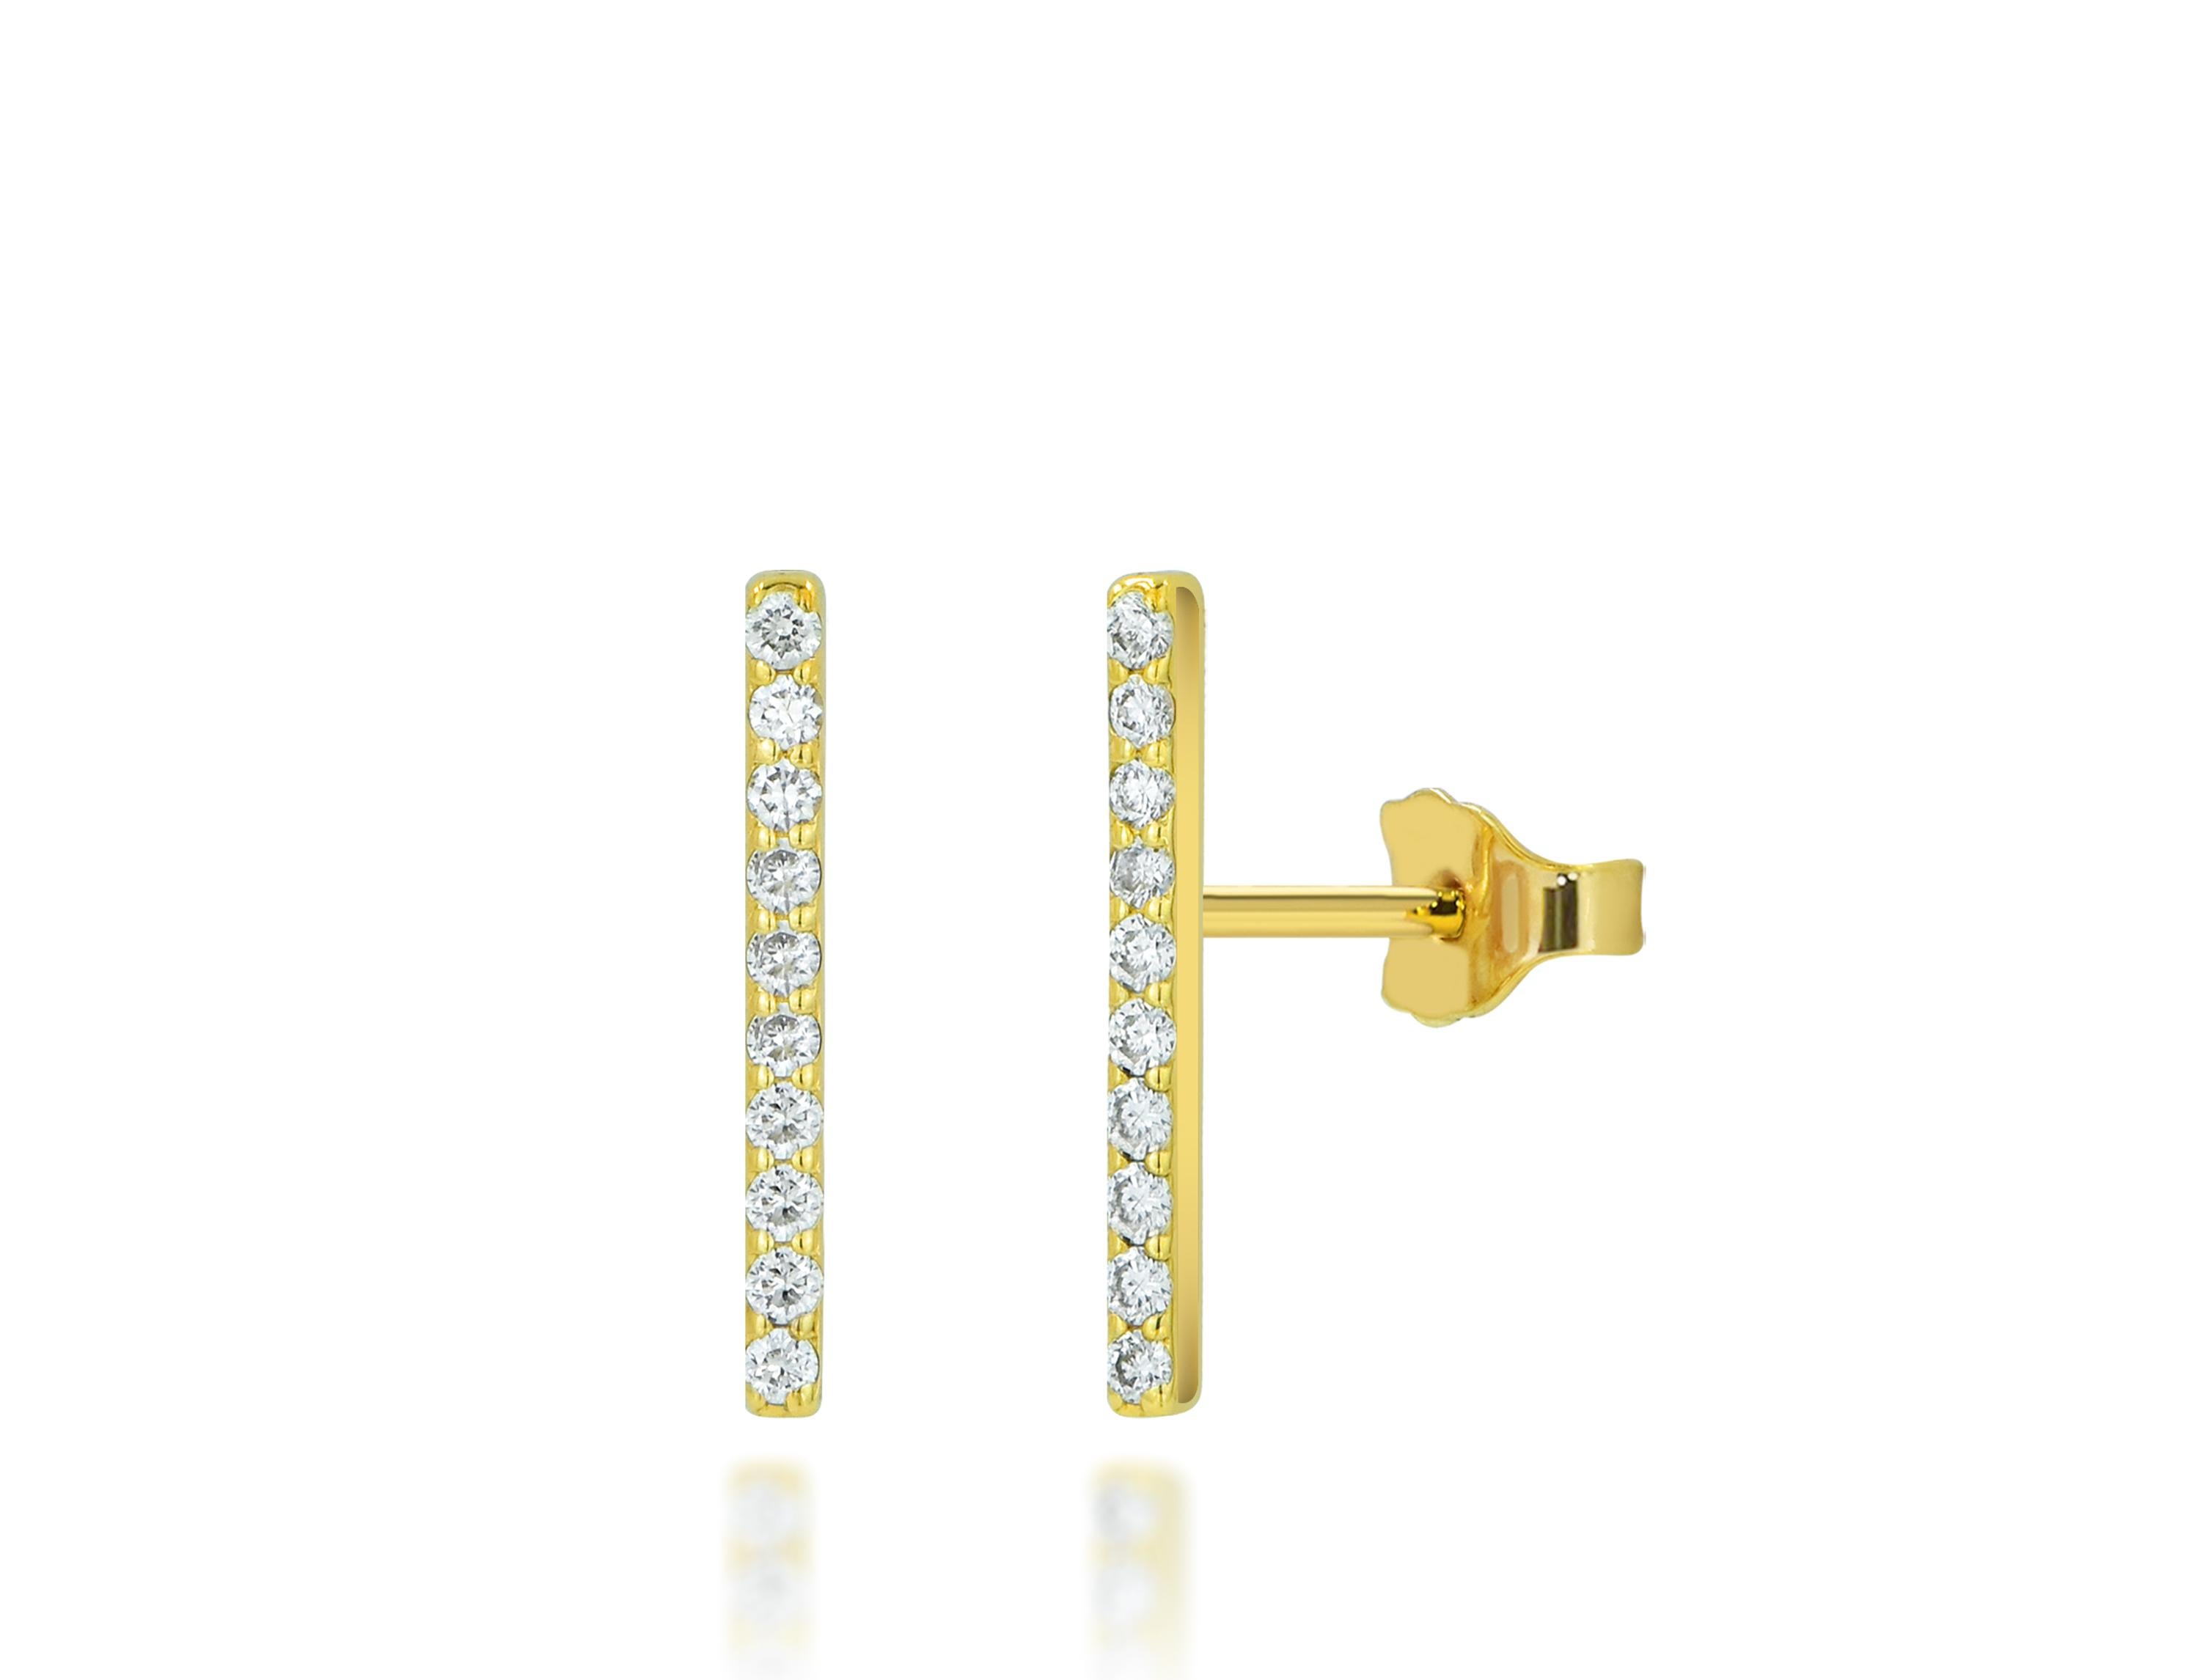 Diamond Bar Earrings 12 mm. Long in 14K Solid Gold.
Available in three colors of gold: White Gold / Rose Gold / Yellow Gold.

These Dainty Bar Stud Earrings are made of 14K Gold featuring shiny brilliant cut natural diamonds set by master setter in